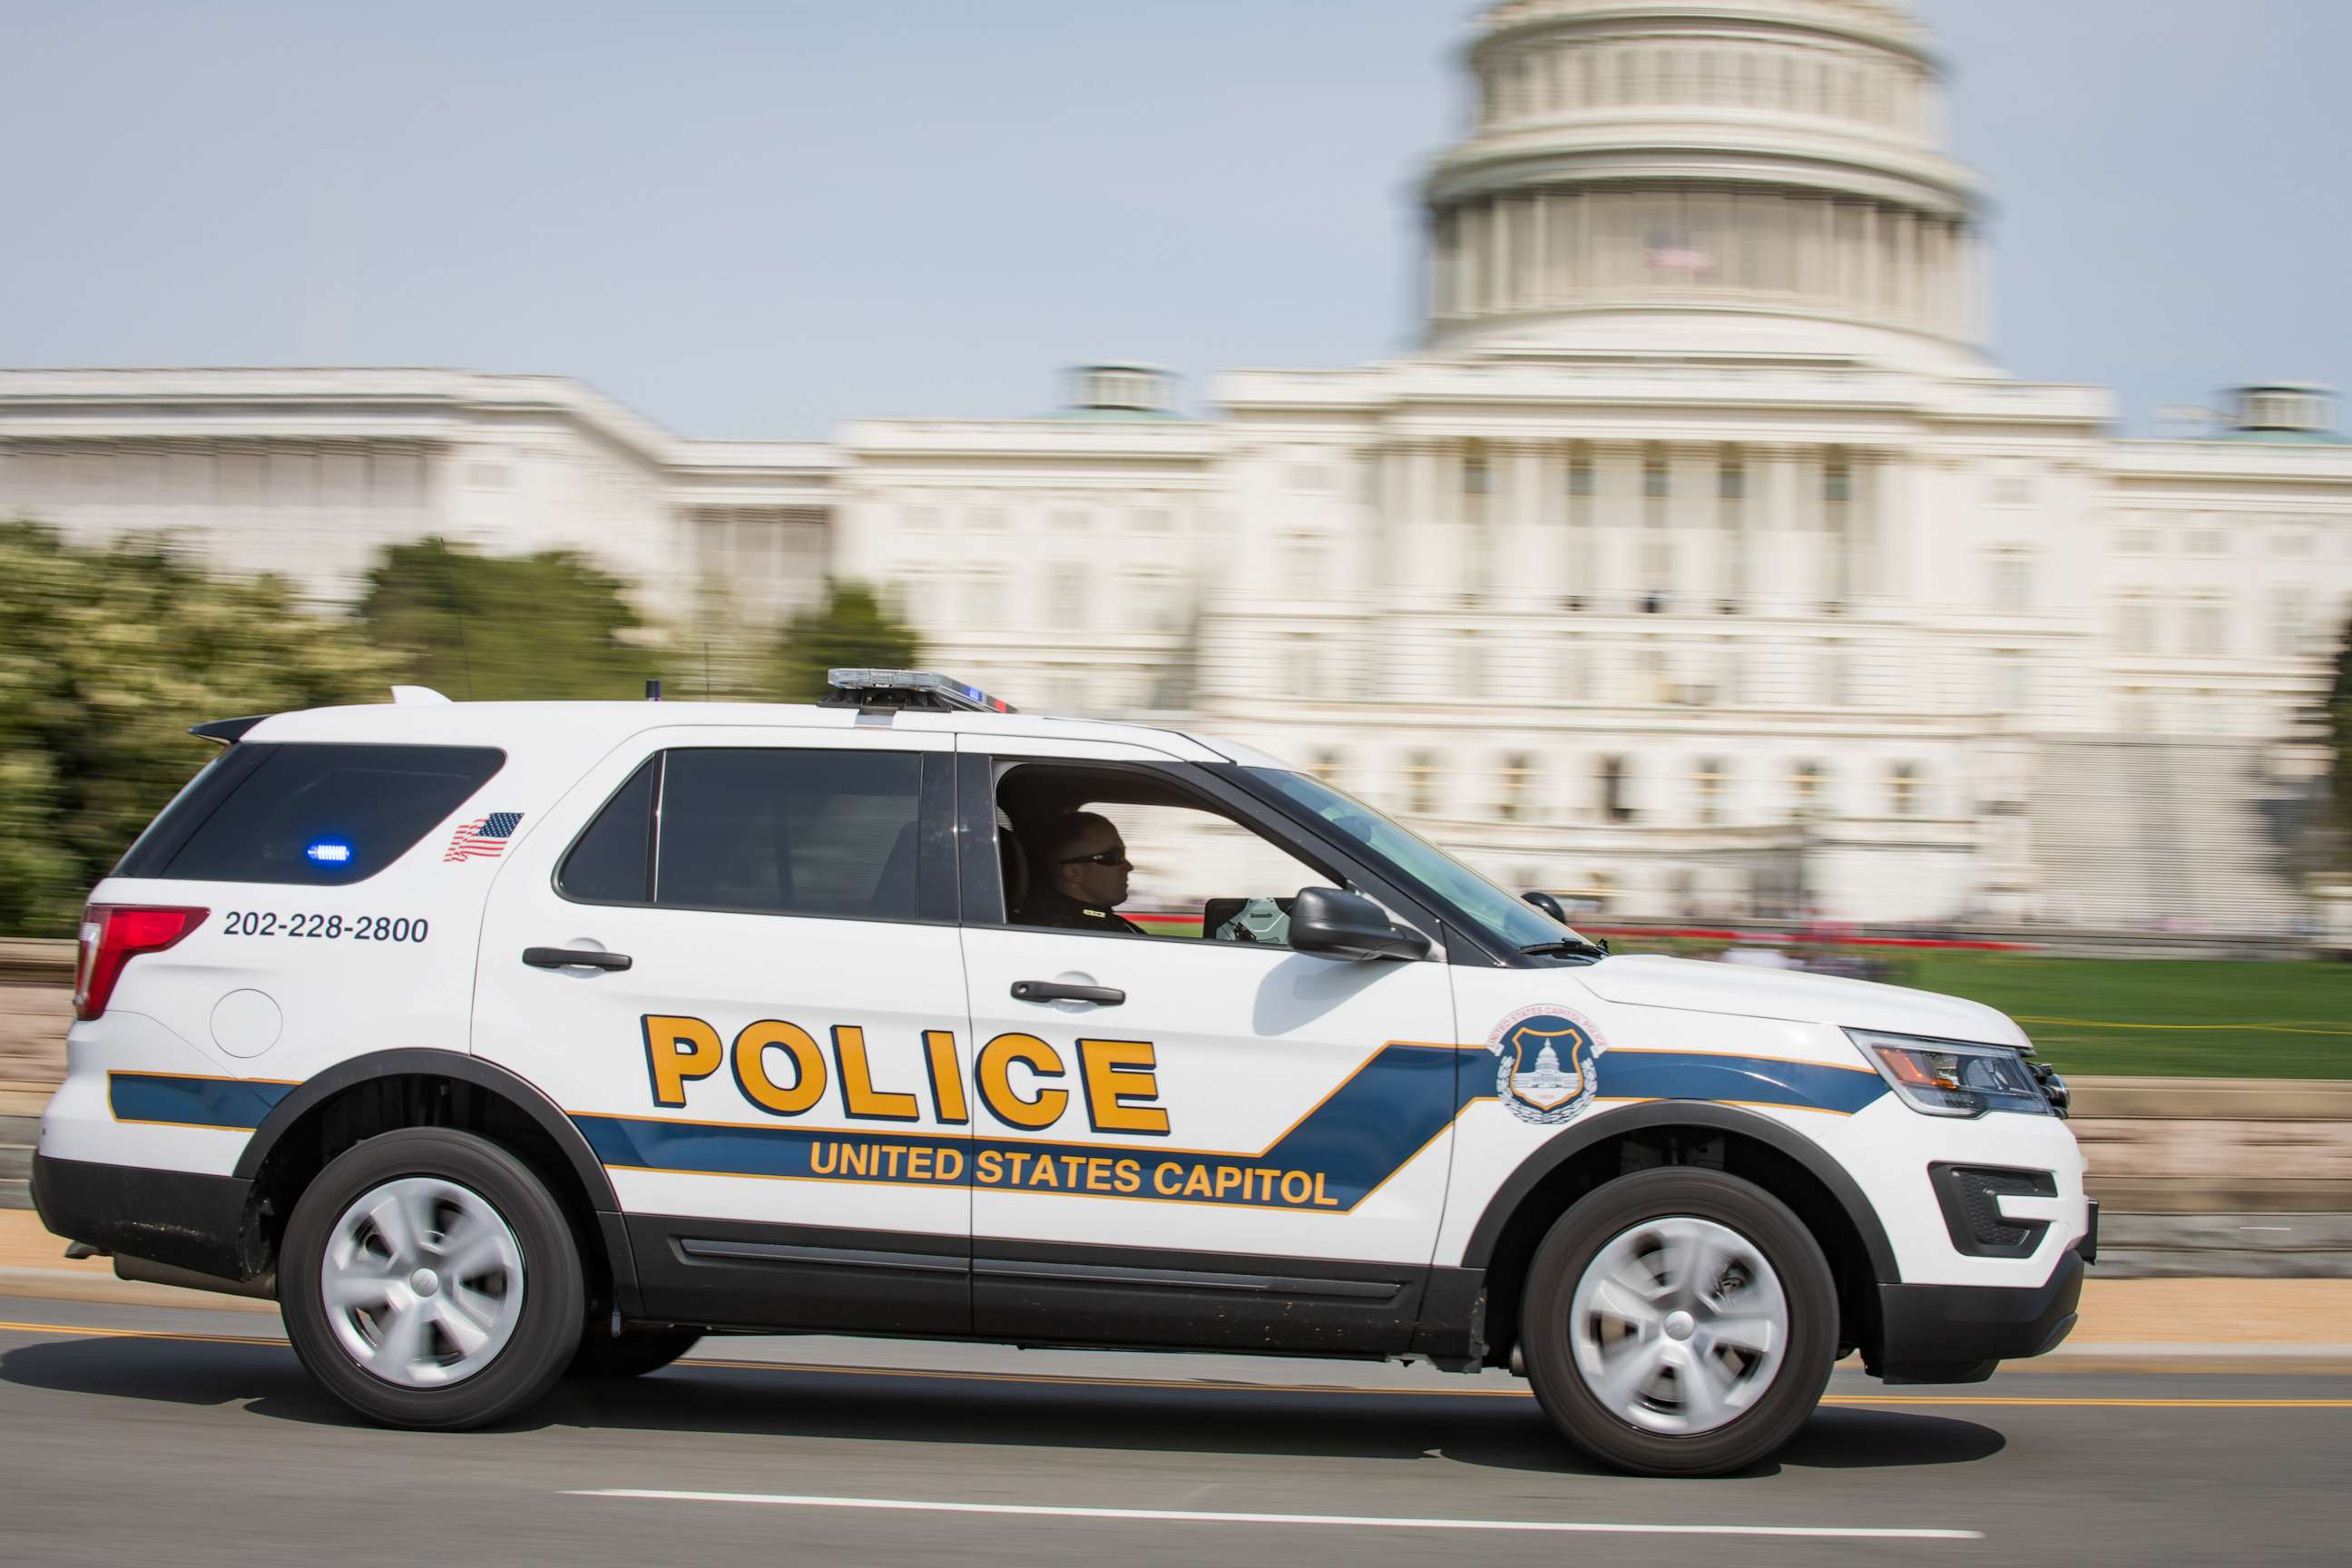 PHOTO: A United States Capitol Police car passes by the Capitol in Washington in this undated image.